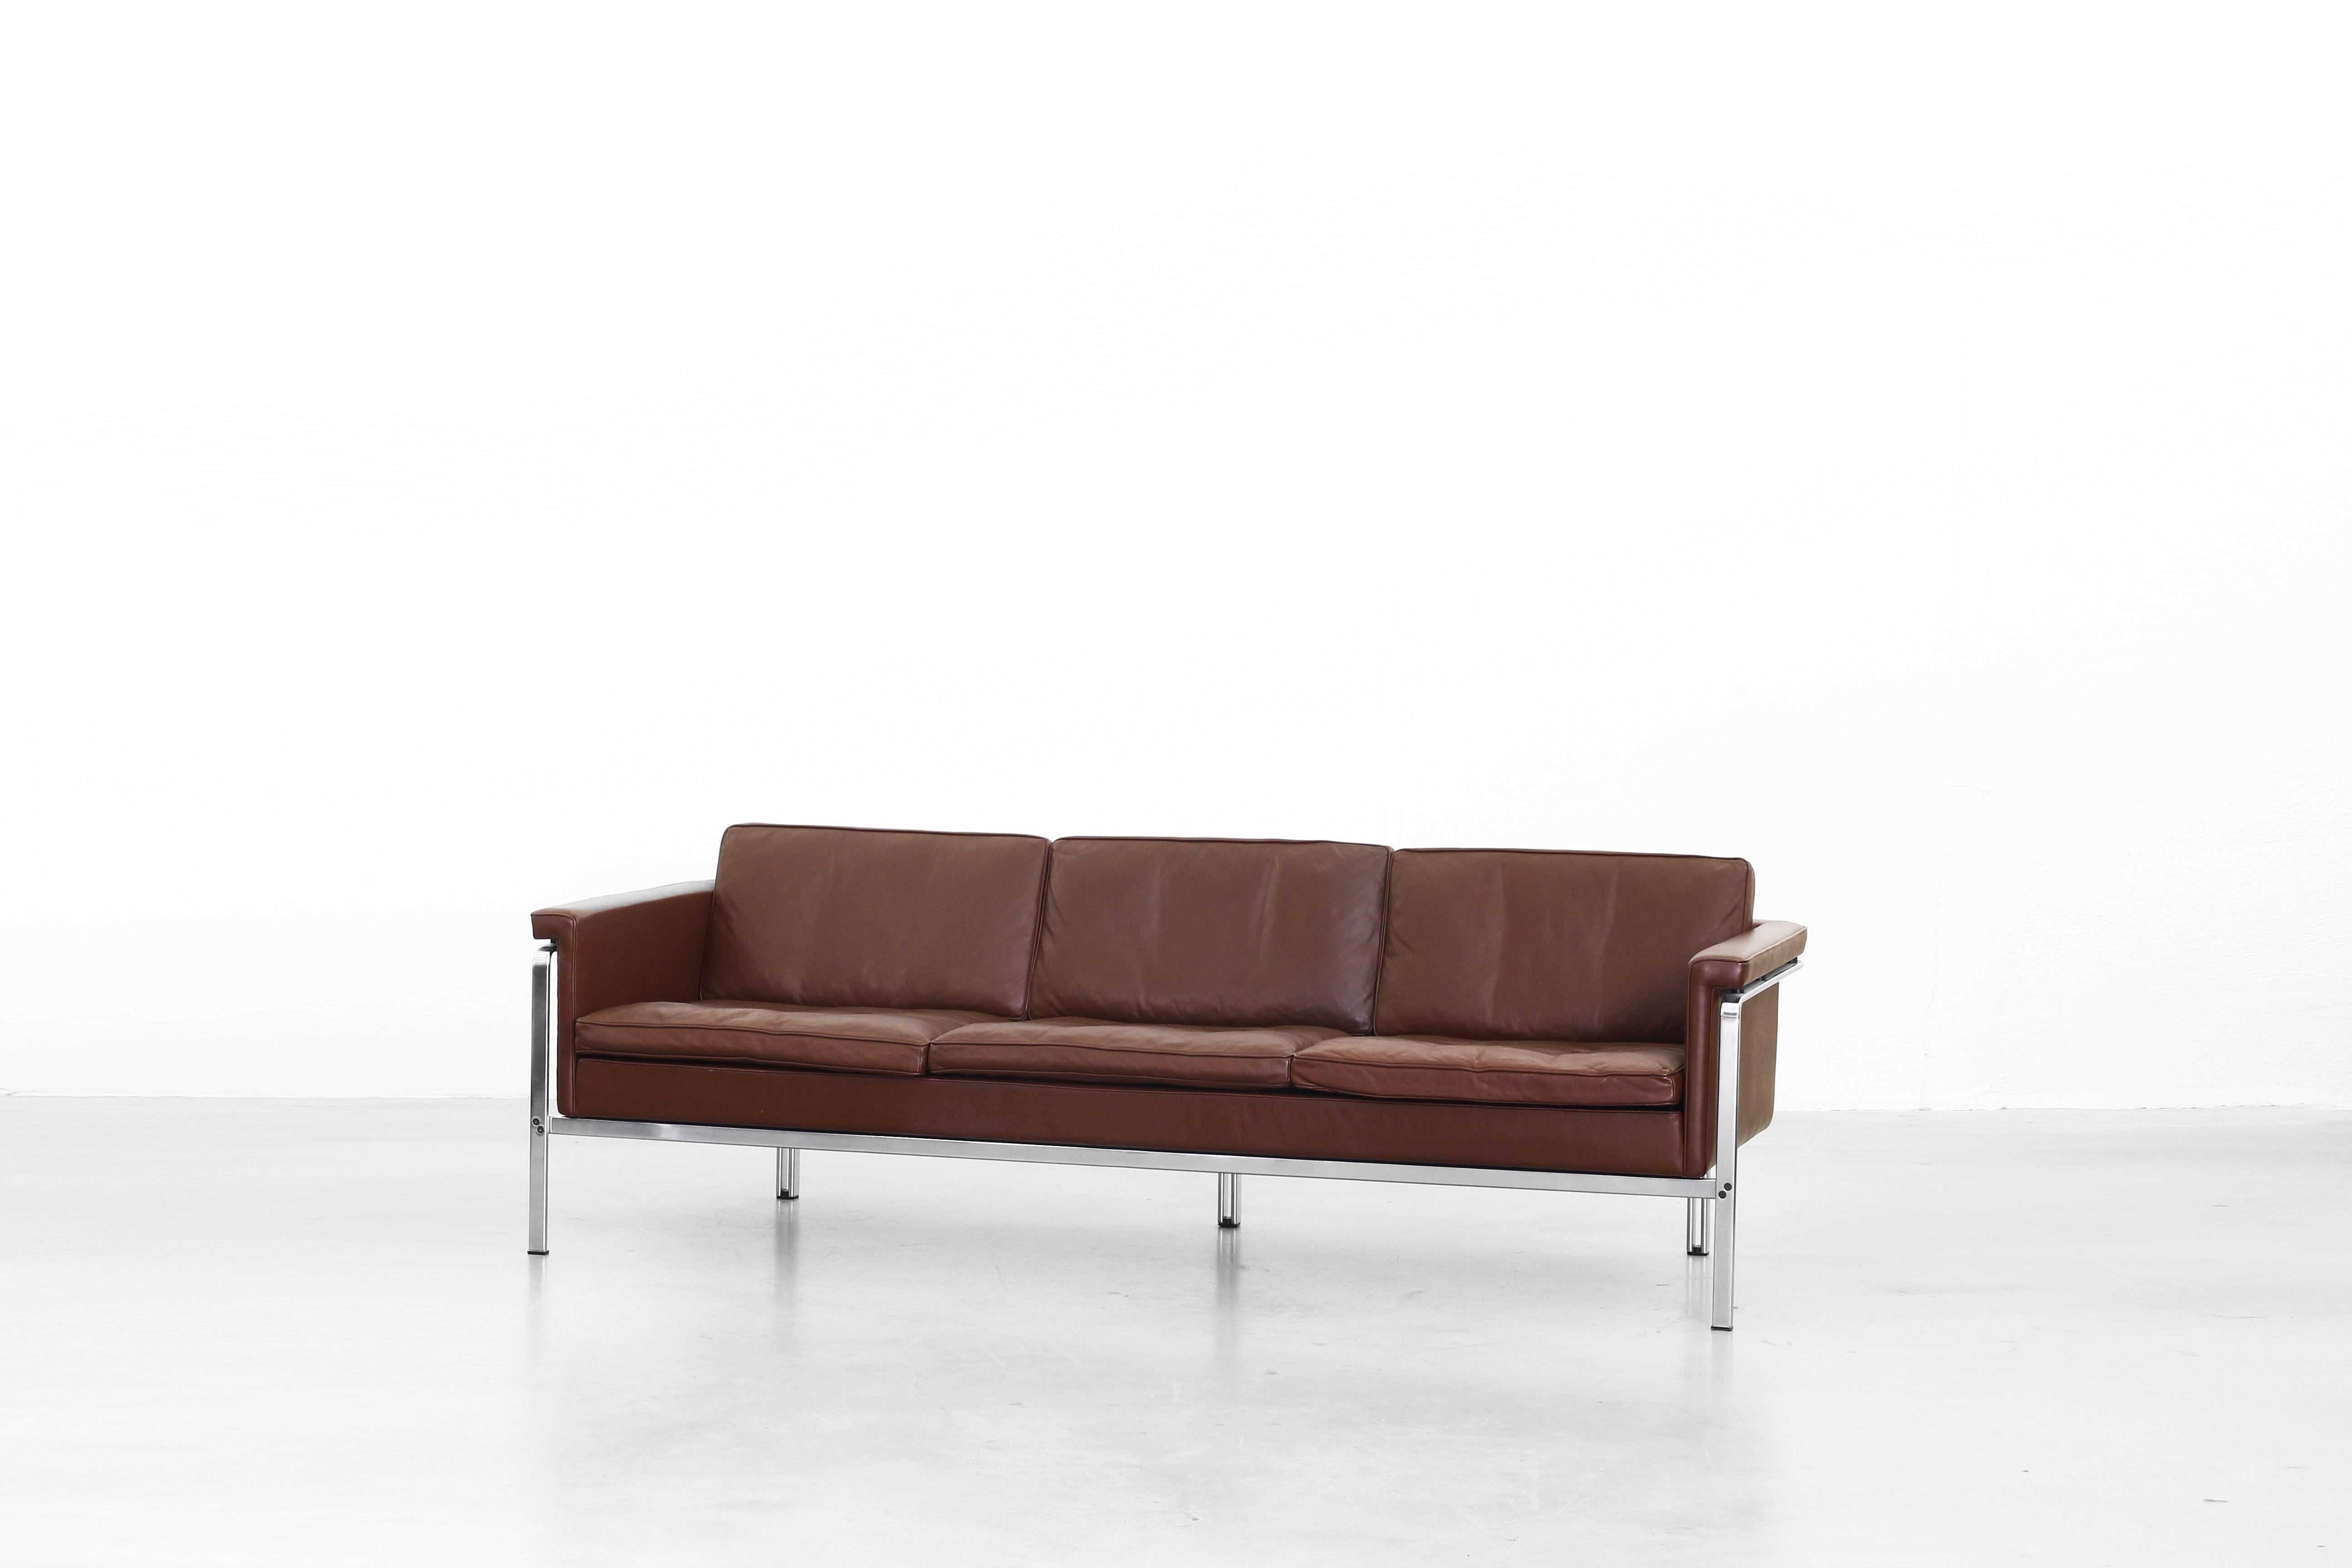 German Sofa by Horst Bruning for Alfred Kill International Leather, 1968